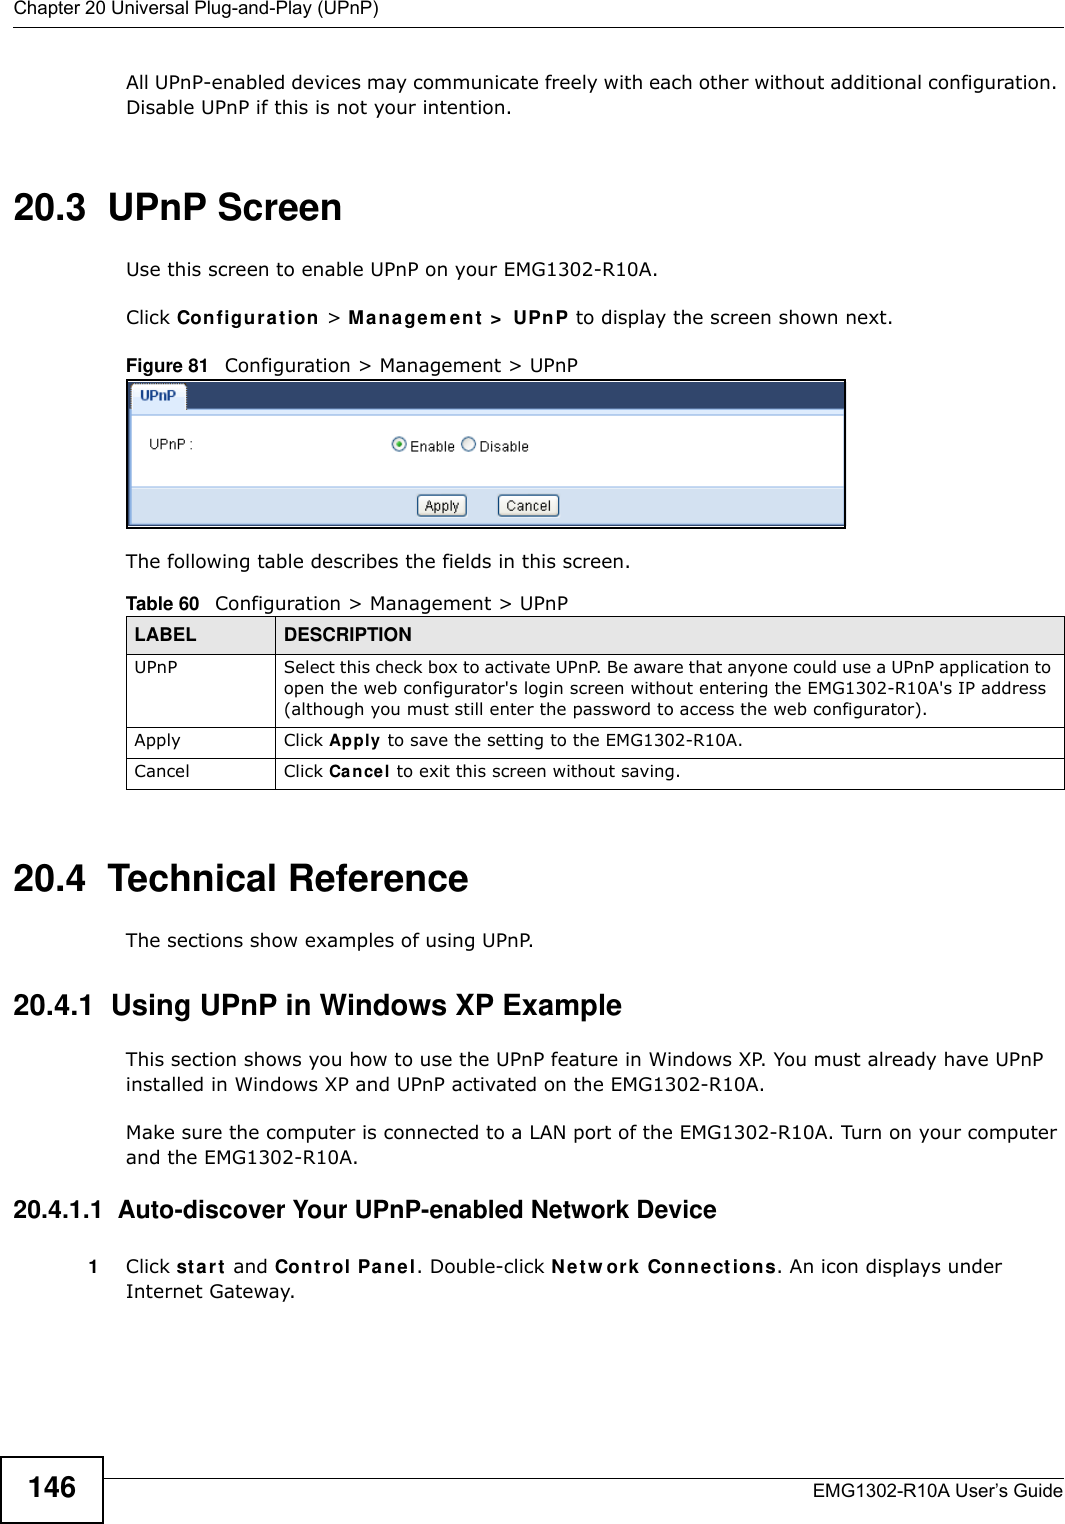 Chapter 20 Universal Plug-and-Play (UPnP)EMG1302-R10A User’s Guide146All UPnP-enabled devices may communicate freely with each other without additional configuration. Disable UPnP if this is not your intention. 20.3  UPnP Screen Use this screen to enable UPnP on your EMG1302-R10A.Click Configu r at ion &gt; Ma n a gem ent  &gt;  UPnP to display the screen shown next. Figure 81   Configuration &gt; Management &gt; UPnPThe following table describes the fields in this screen.20.4  Technical ReferenceThe sections show examples of using UPnP. 20.4.1  Using UPnP in Windows XP ExampleThis section shows you how to use the UPnP feature in Windows XP. You must already have UPnP installed in Windows XP and UPnP activated on the EMG1302-R10A.Make sure the computer is connected to a LAN port of the EMG1302-R10A. Turn on your computer and the EMG1302-R10A. 20.4.1.1  Auto-discover Your UPnP-enabled Network Device1Click st a r t  and Cont r ol Panel. Double-click Net w ork Connect ions. An icon displays under Internet Gateway.Table 60   Configuration &gt; Management &gt; UPnPLABEL DESCRIPTIONUPnP Select this check box to activate UPnP. Be aware that anyone could use a UPnP application to open the web configurator&apos;s login screen without entering the EMG1302-R10A&apos;s IP address (although you must still enter the password to access the web configurator).Apply Click Apply  to save the setting to the EMG1302-R10A.Cancel Click Cancel to exit this screen without saving.